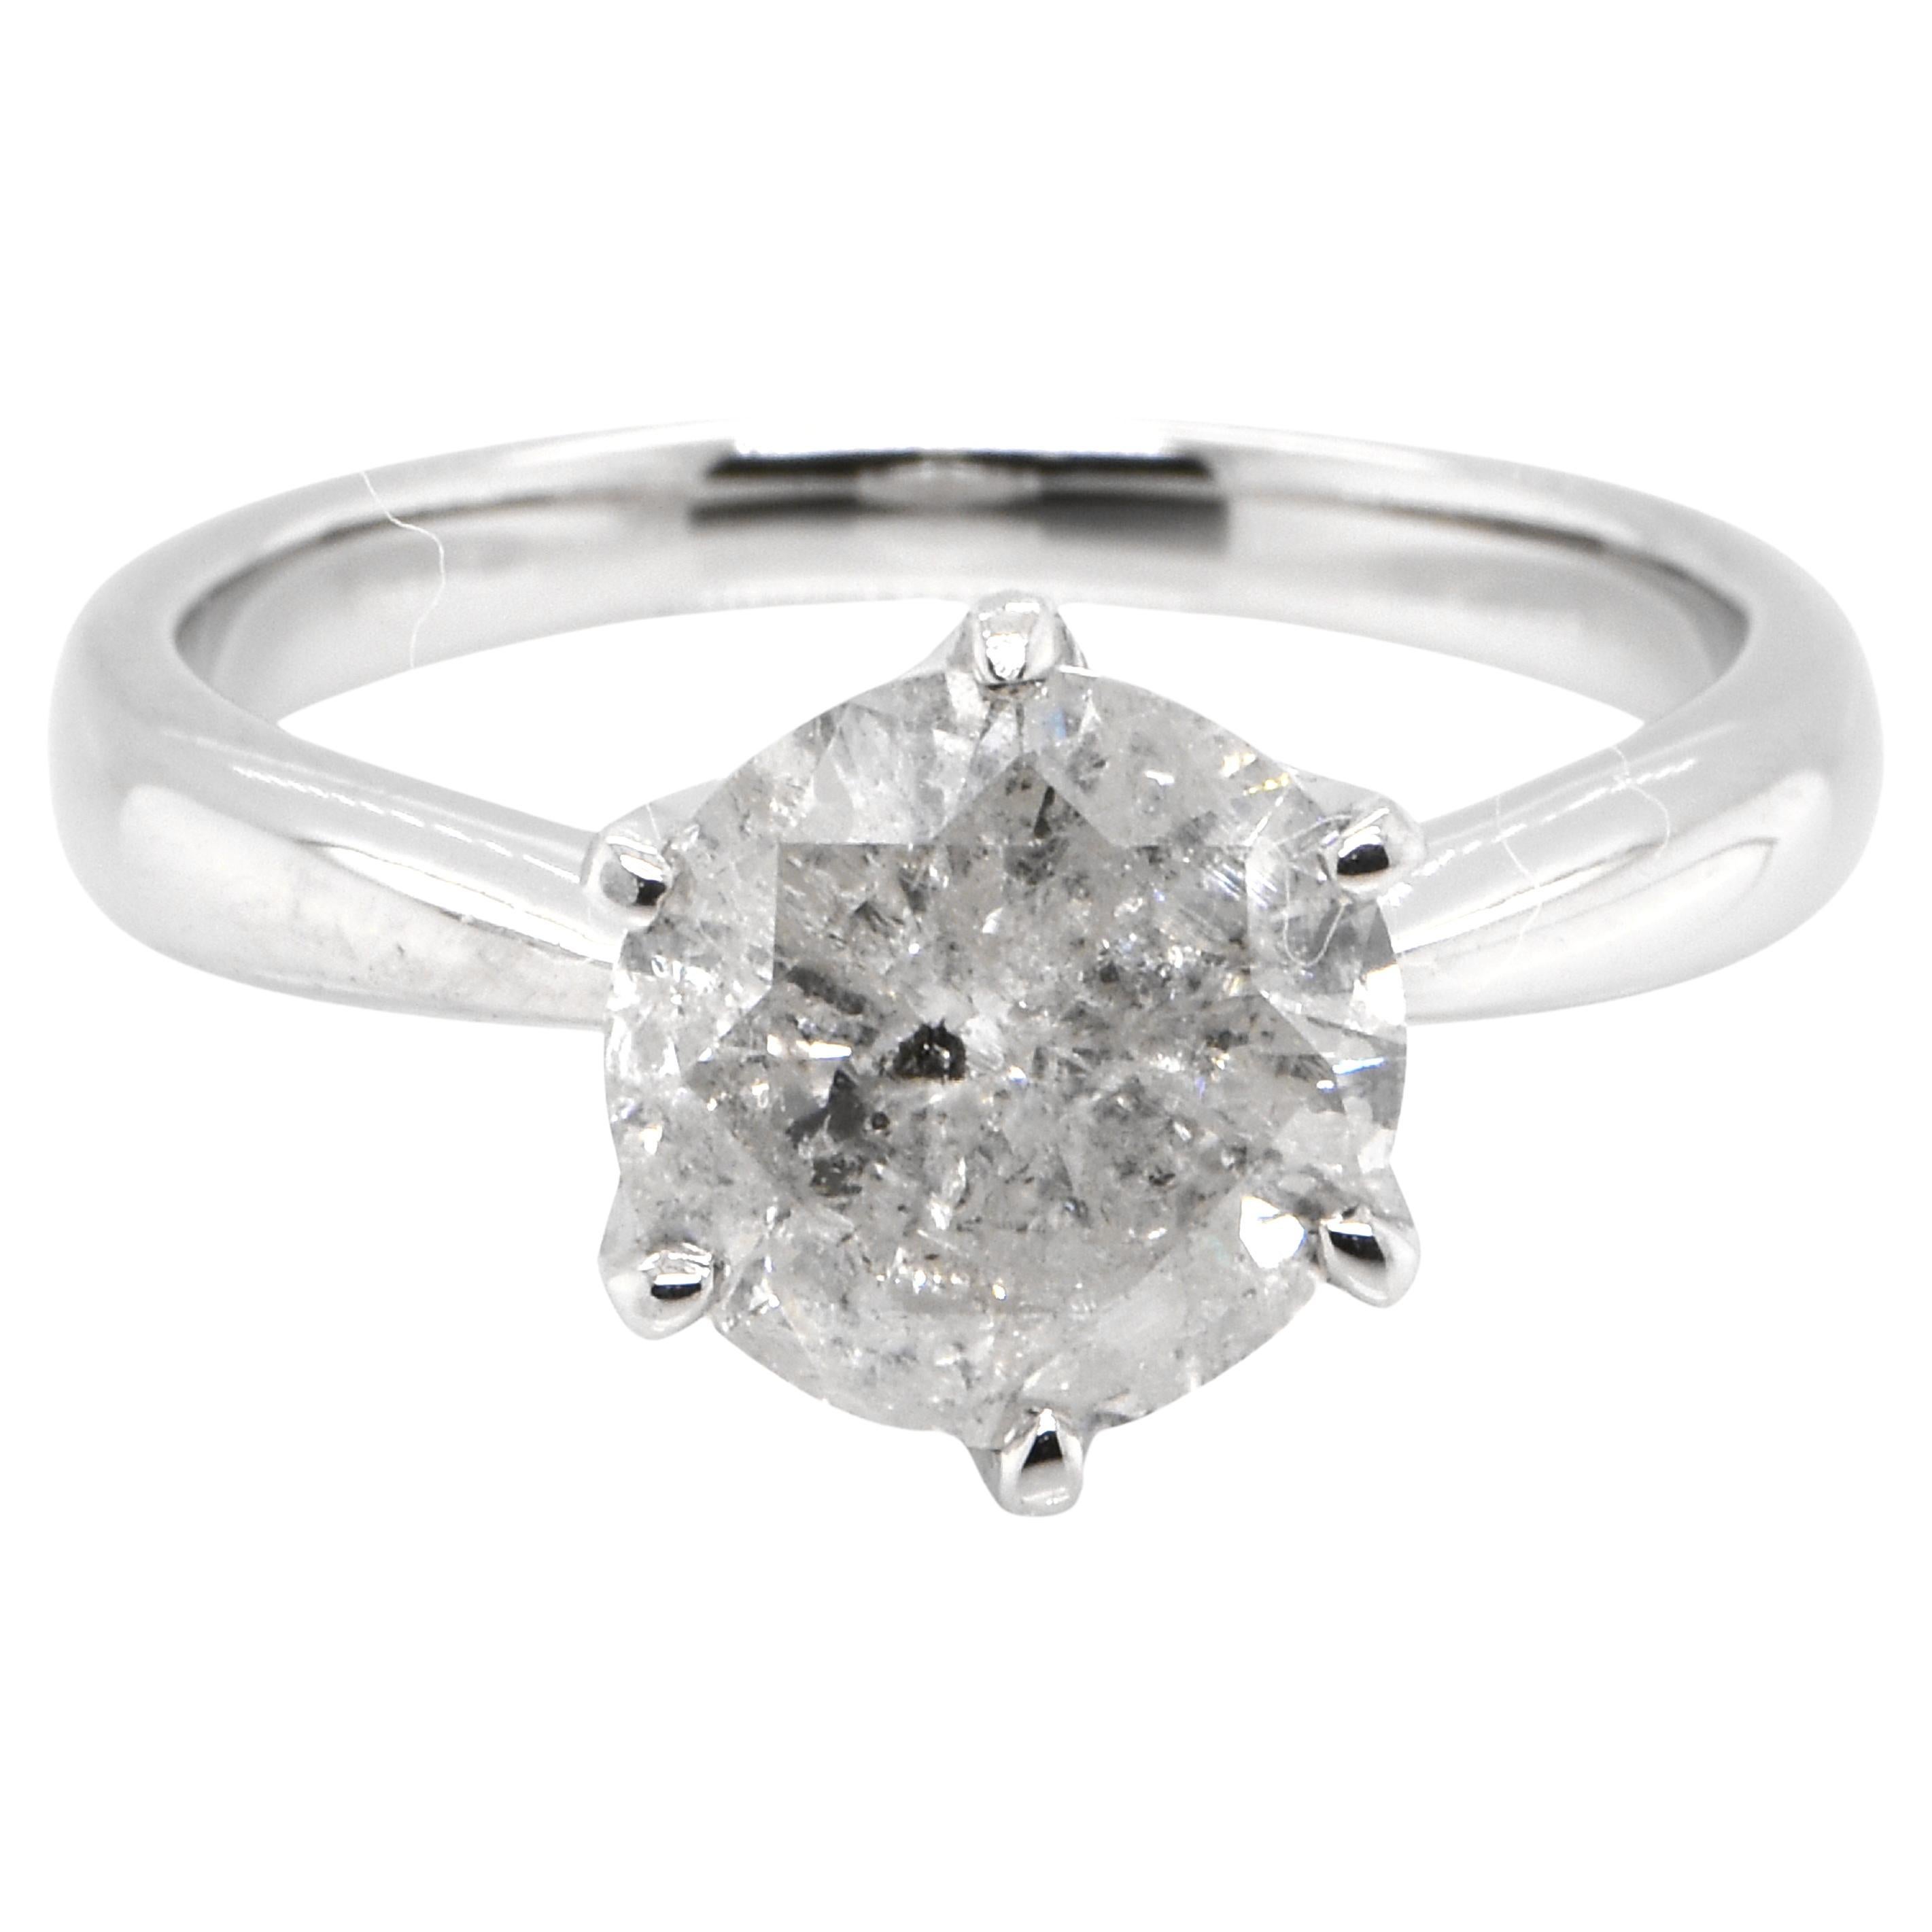 2.08 Carat Natural "Salt and Pepper" Diamond Solitaire Ring Made in Platinum For Sale